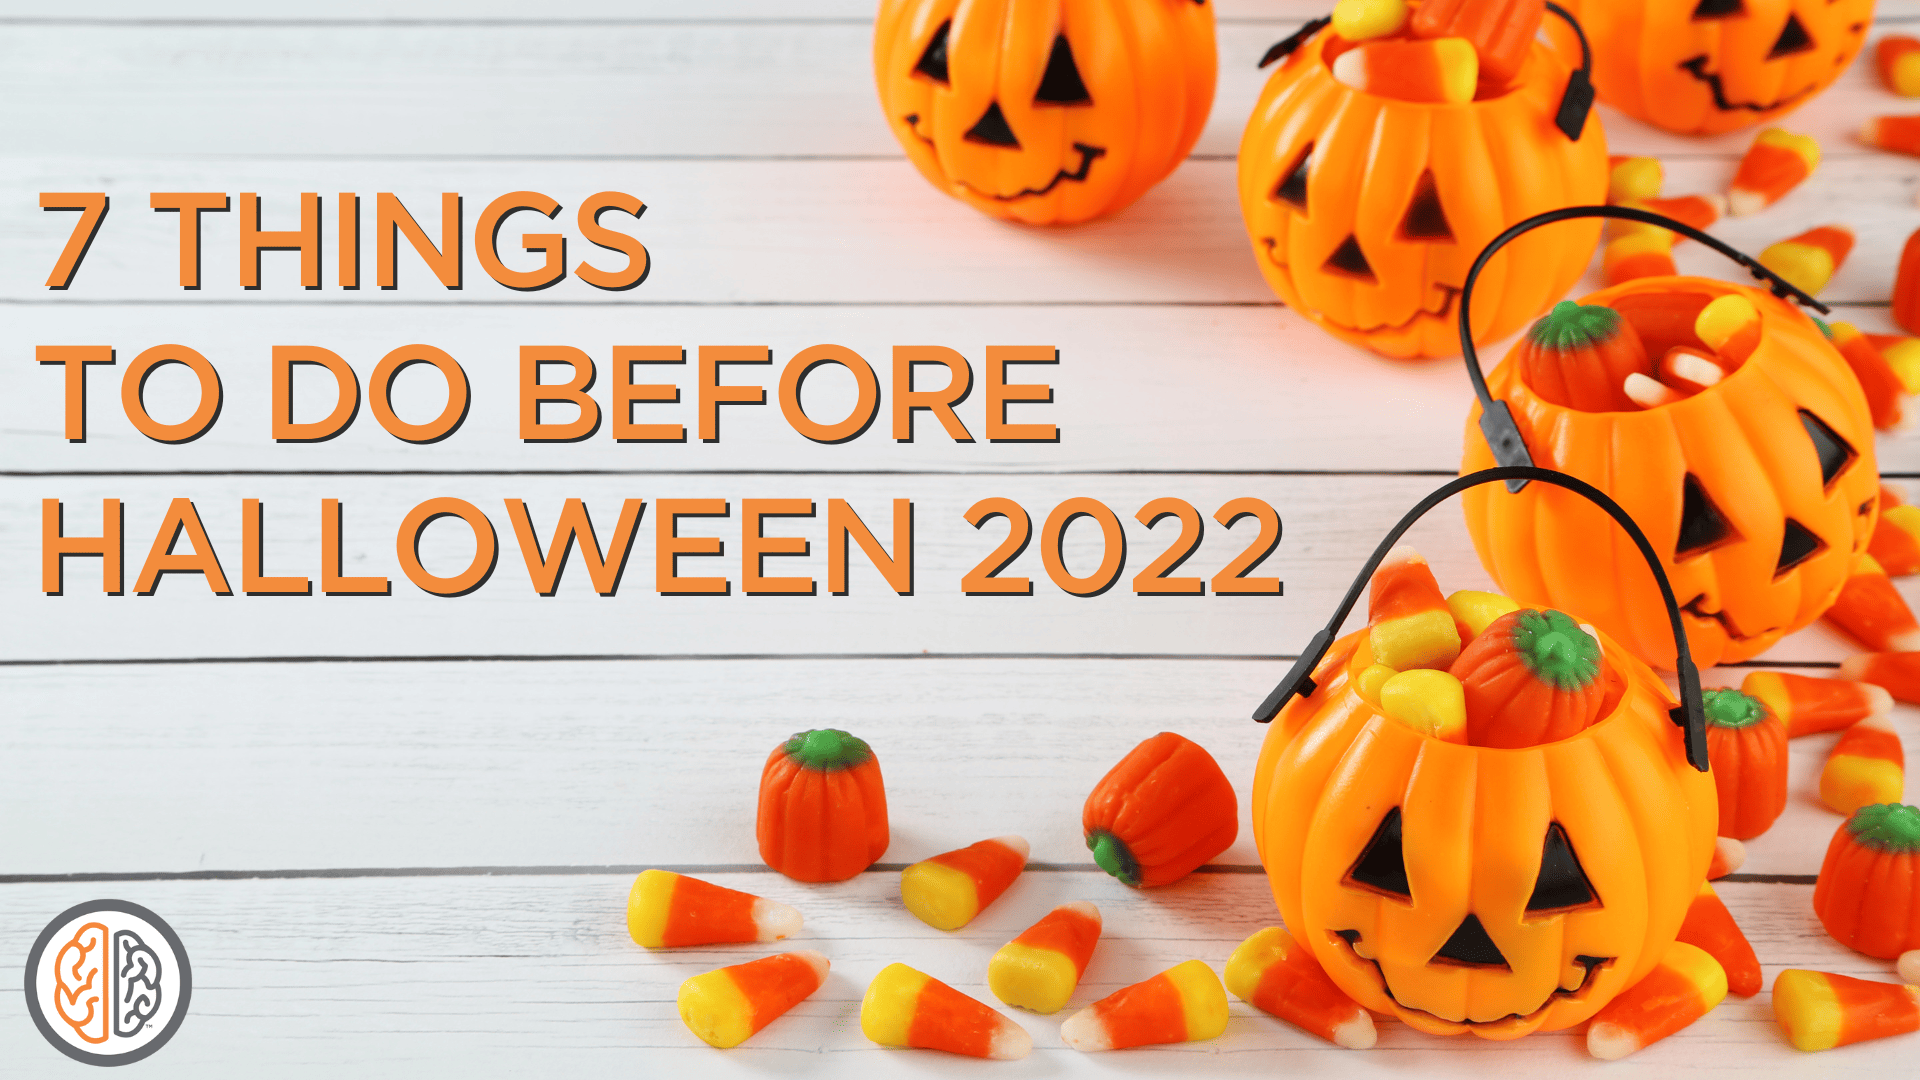 7 Things to do Before Halloween 2022